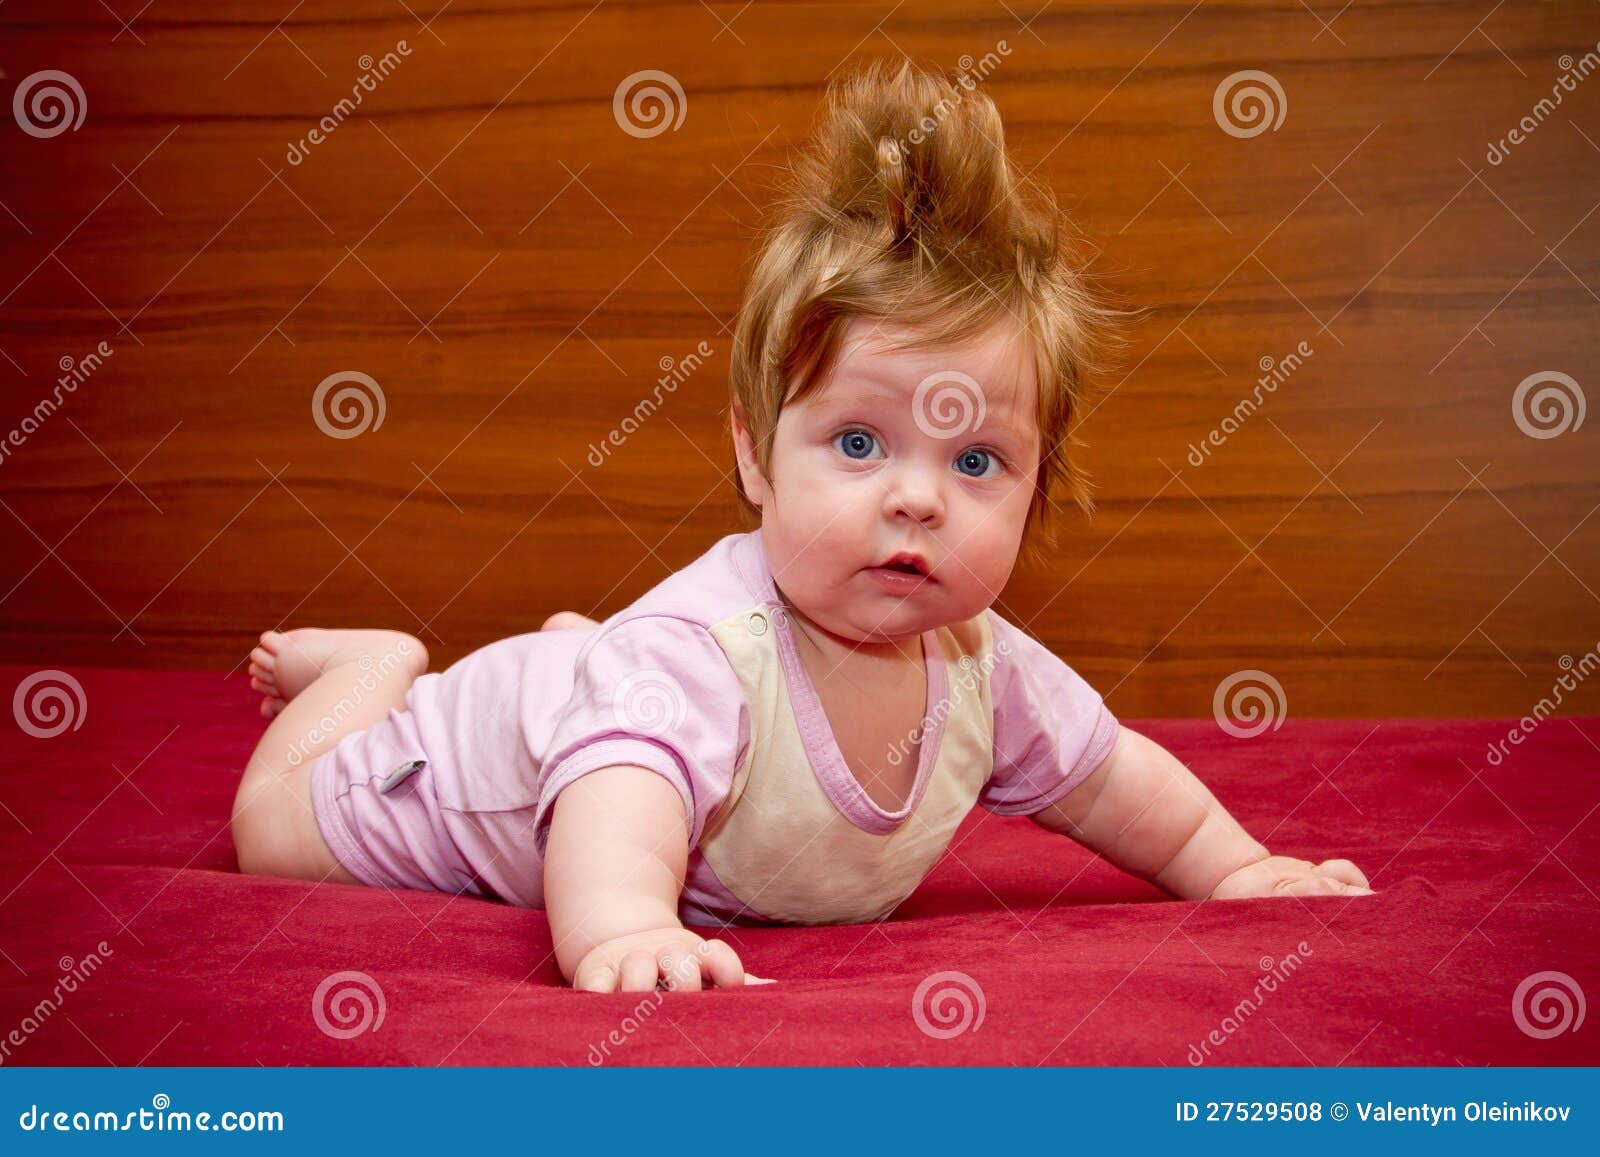 cute funny baby girl with cheerful coiffure